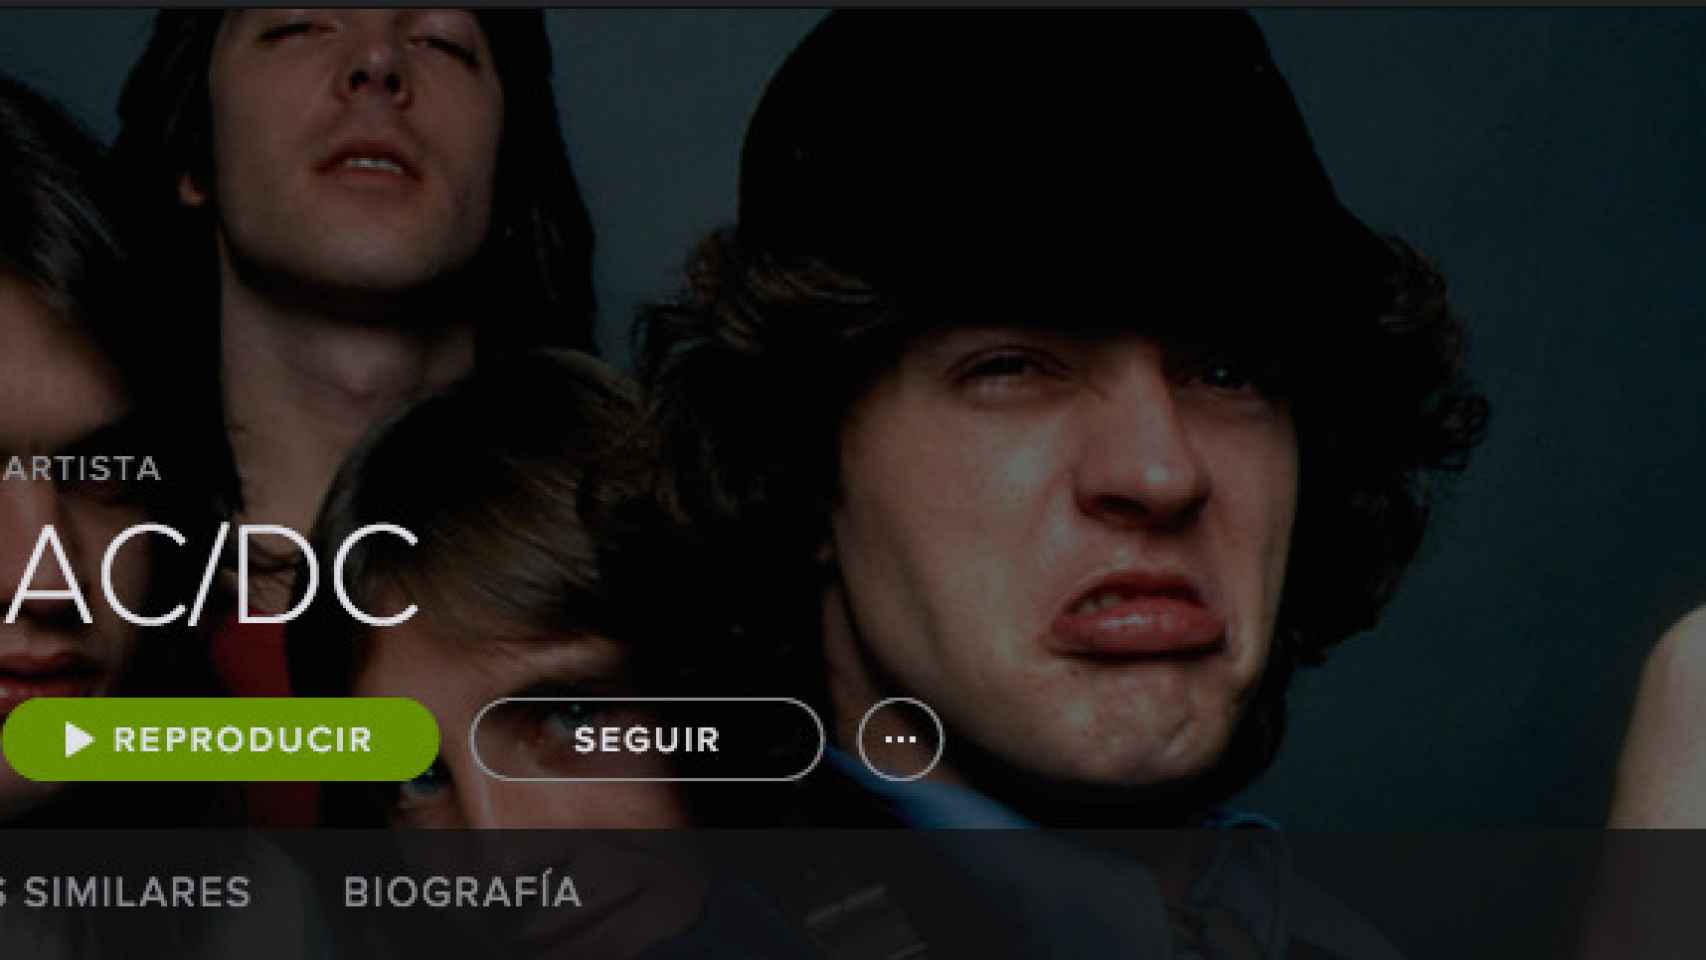 For those about to rock… AC/DC ya disponible en Spotify y en Google Play Music